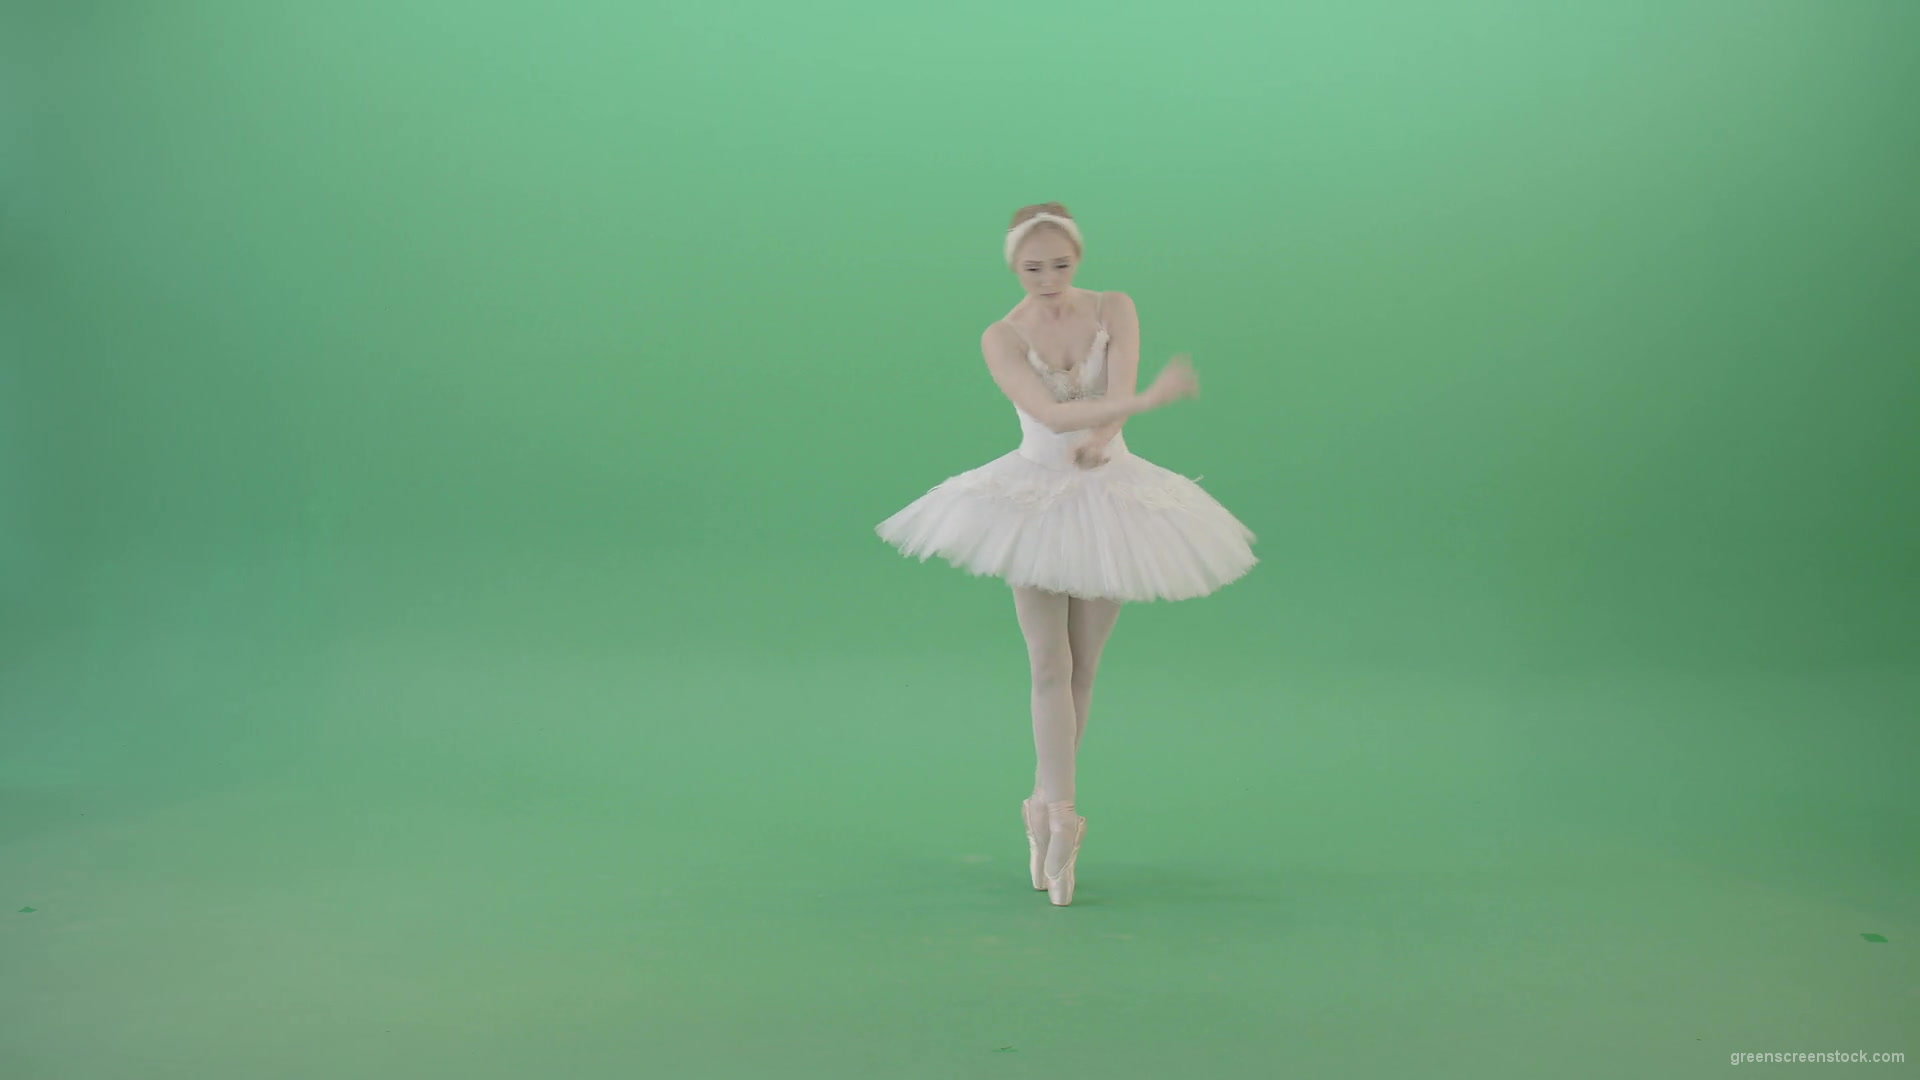 Back-side-view-ballet-dancing-tiny-girl-performs-in-green-screen-studio-4K-Video-Footage-1920_006 Green Screen Stock